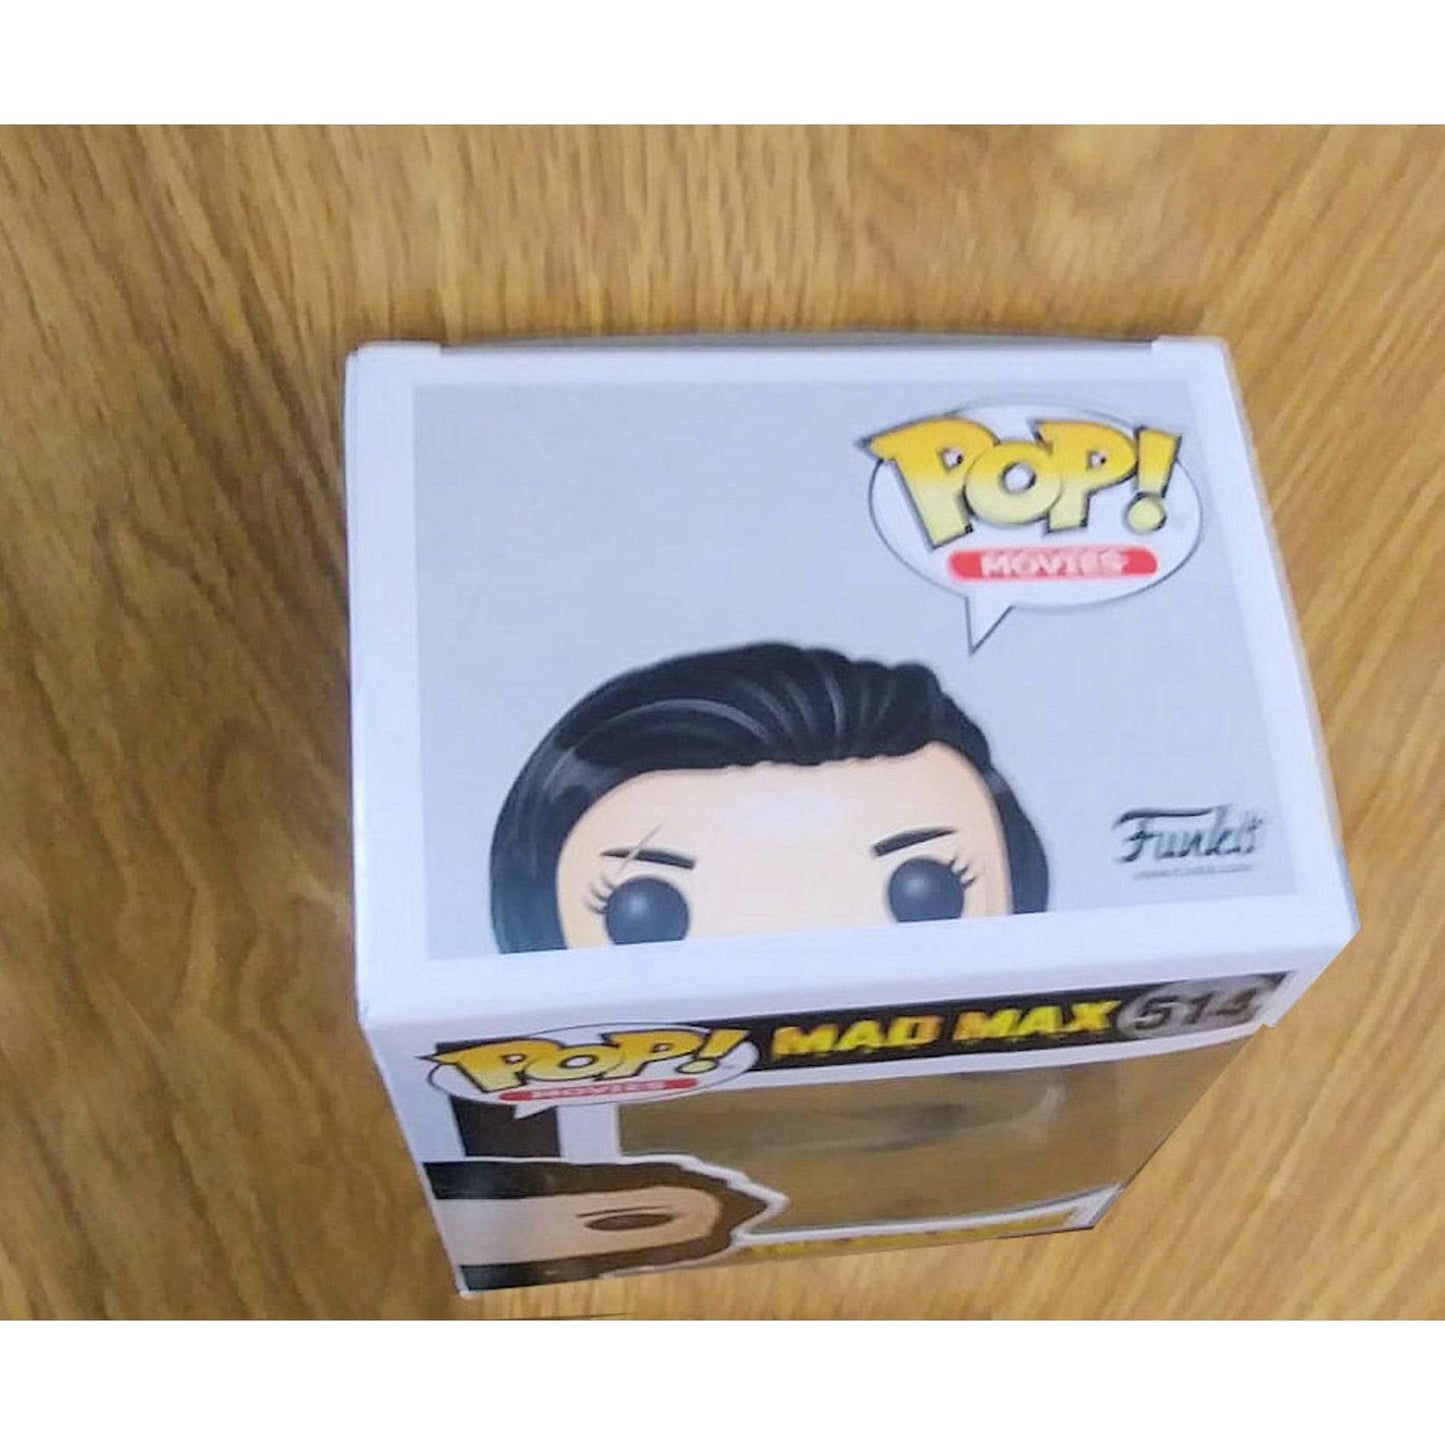 48 Pack For Boxed Funko Pop Vinyl: Clear Acrylic Wall Stand, Stick On, Single Floating Shelf less, No Nails or Screws